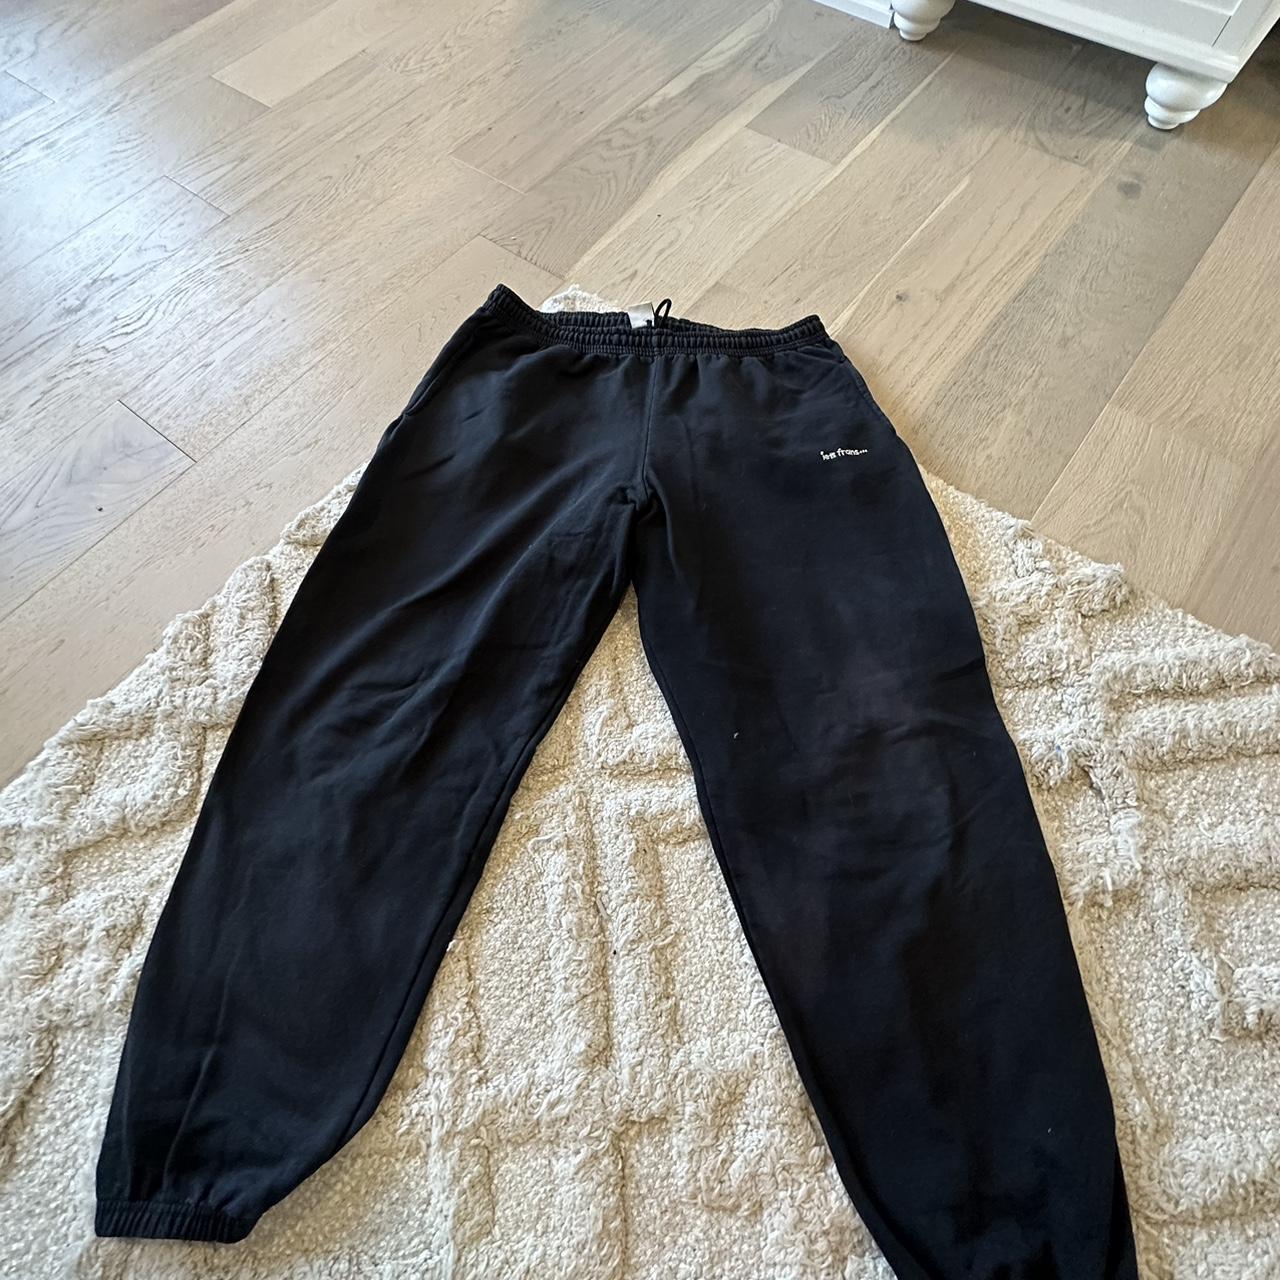 These are iets frans brand sweats from Urban... - Depop